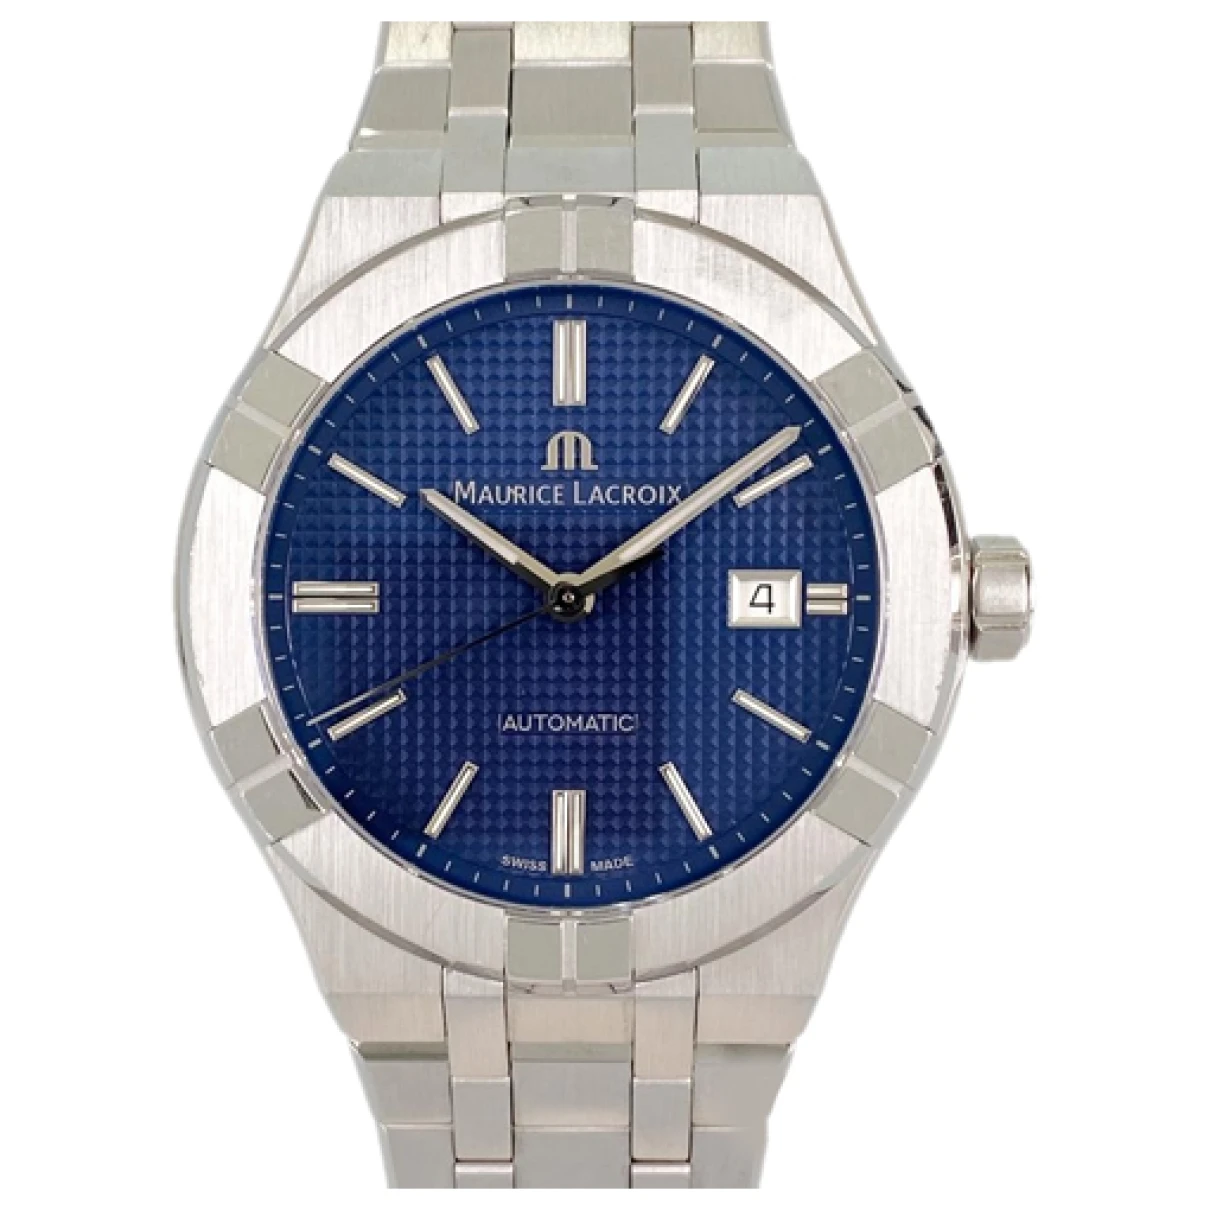 Pre-owned Maurice Lacroix Watch In Navy